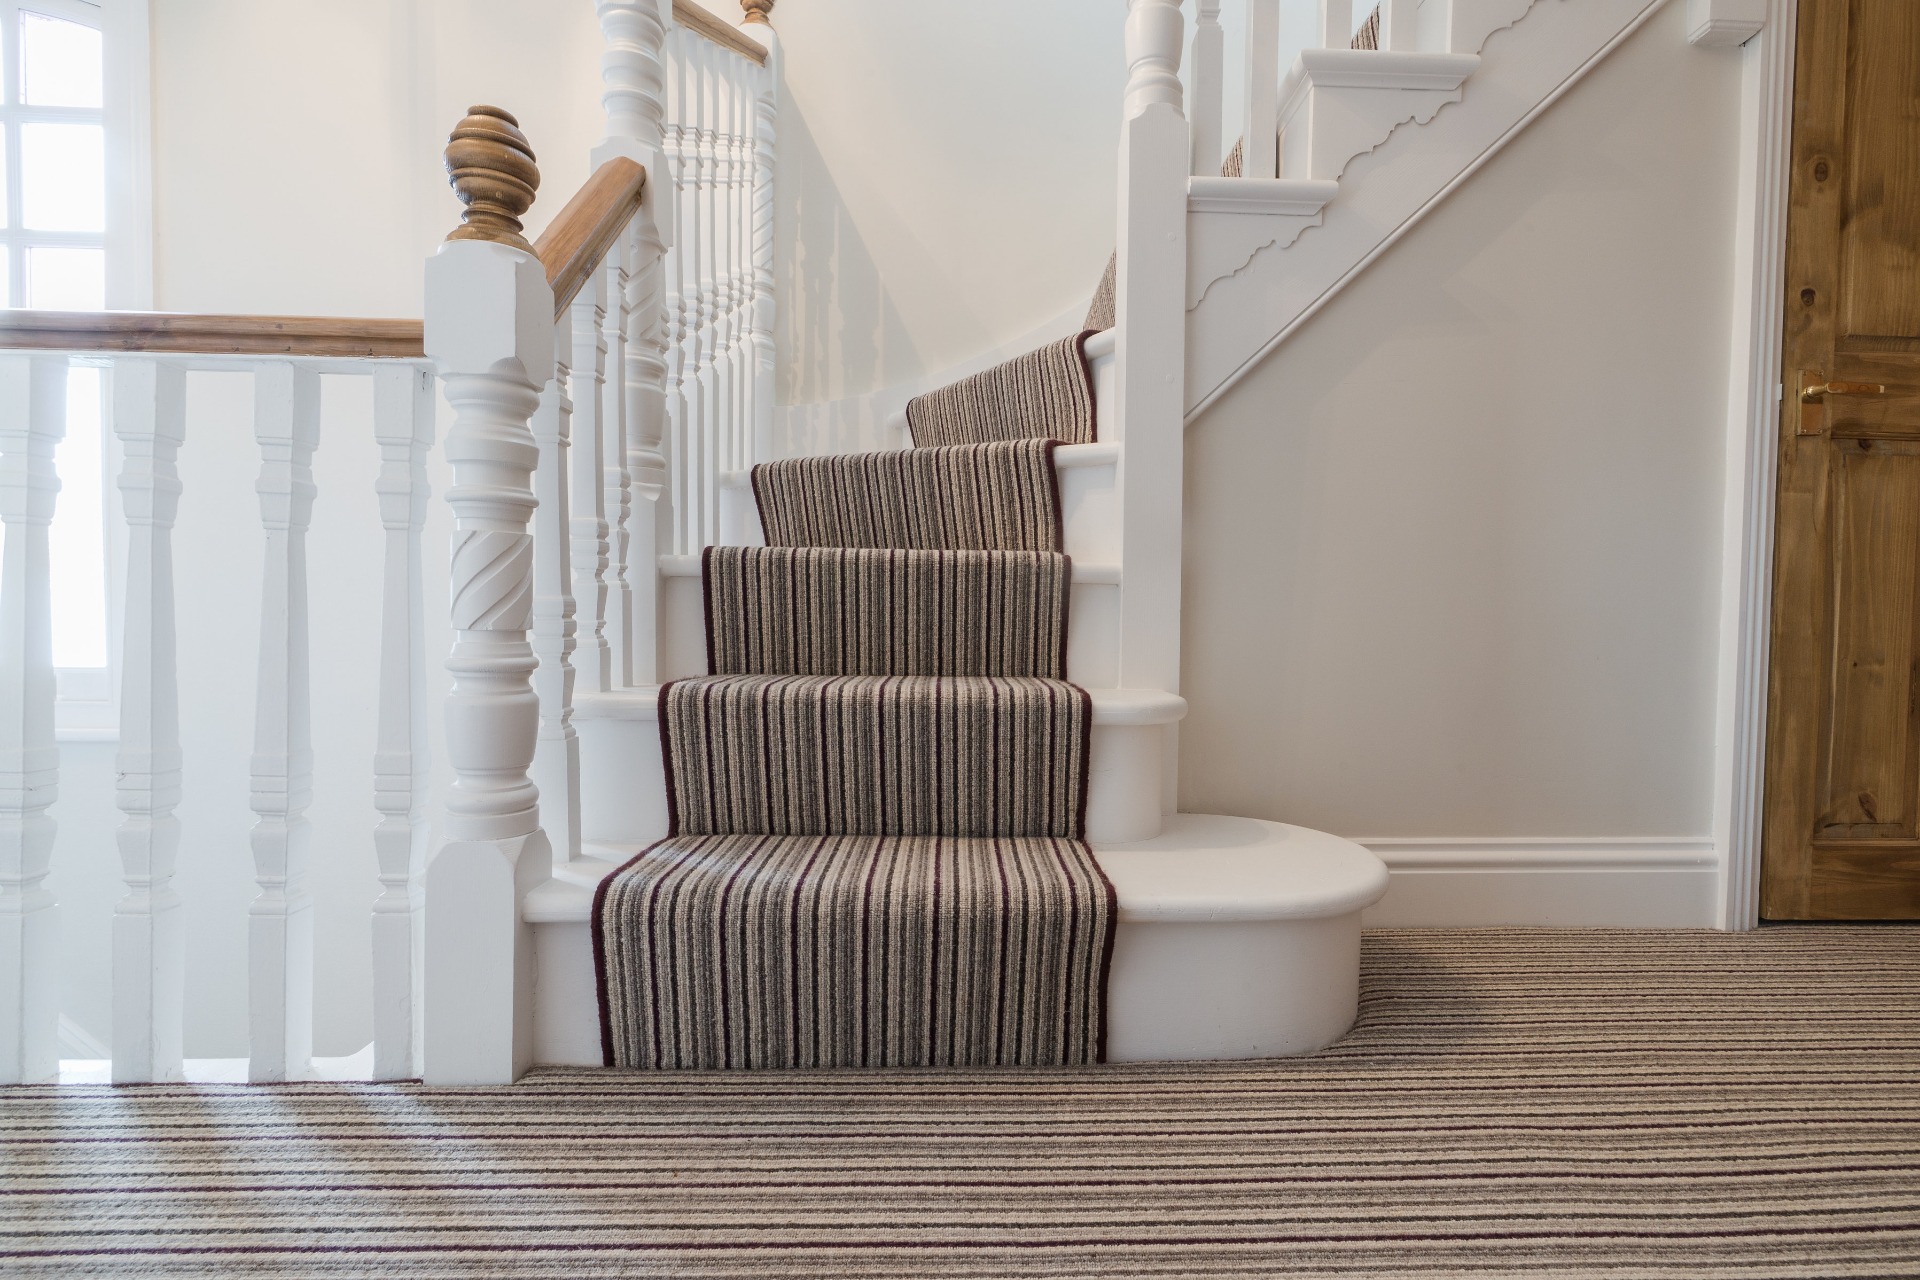 Bullnose step on traditional staircase, Berkshire